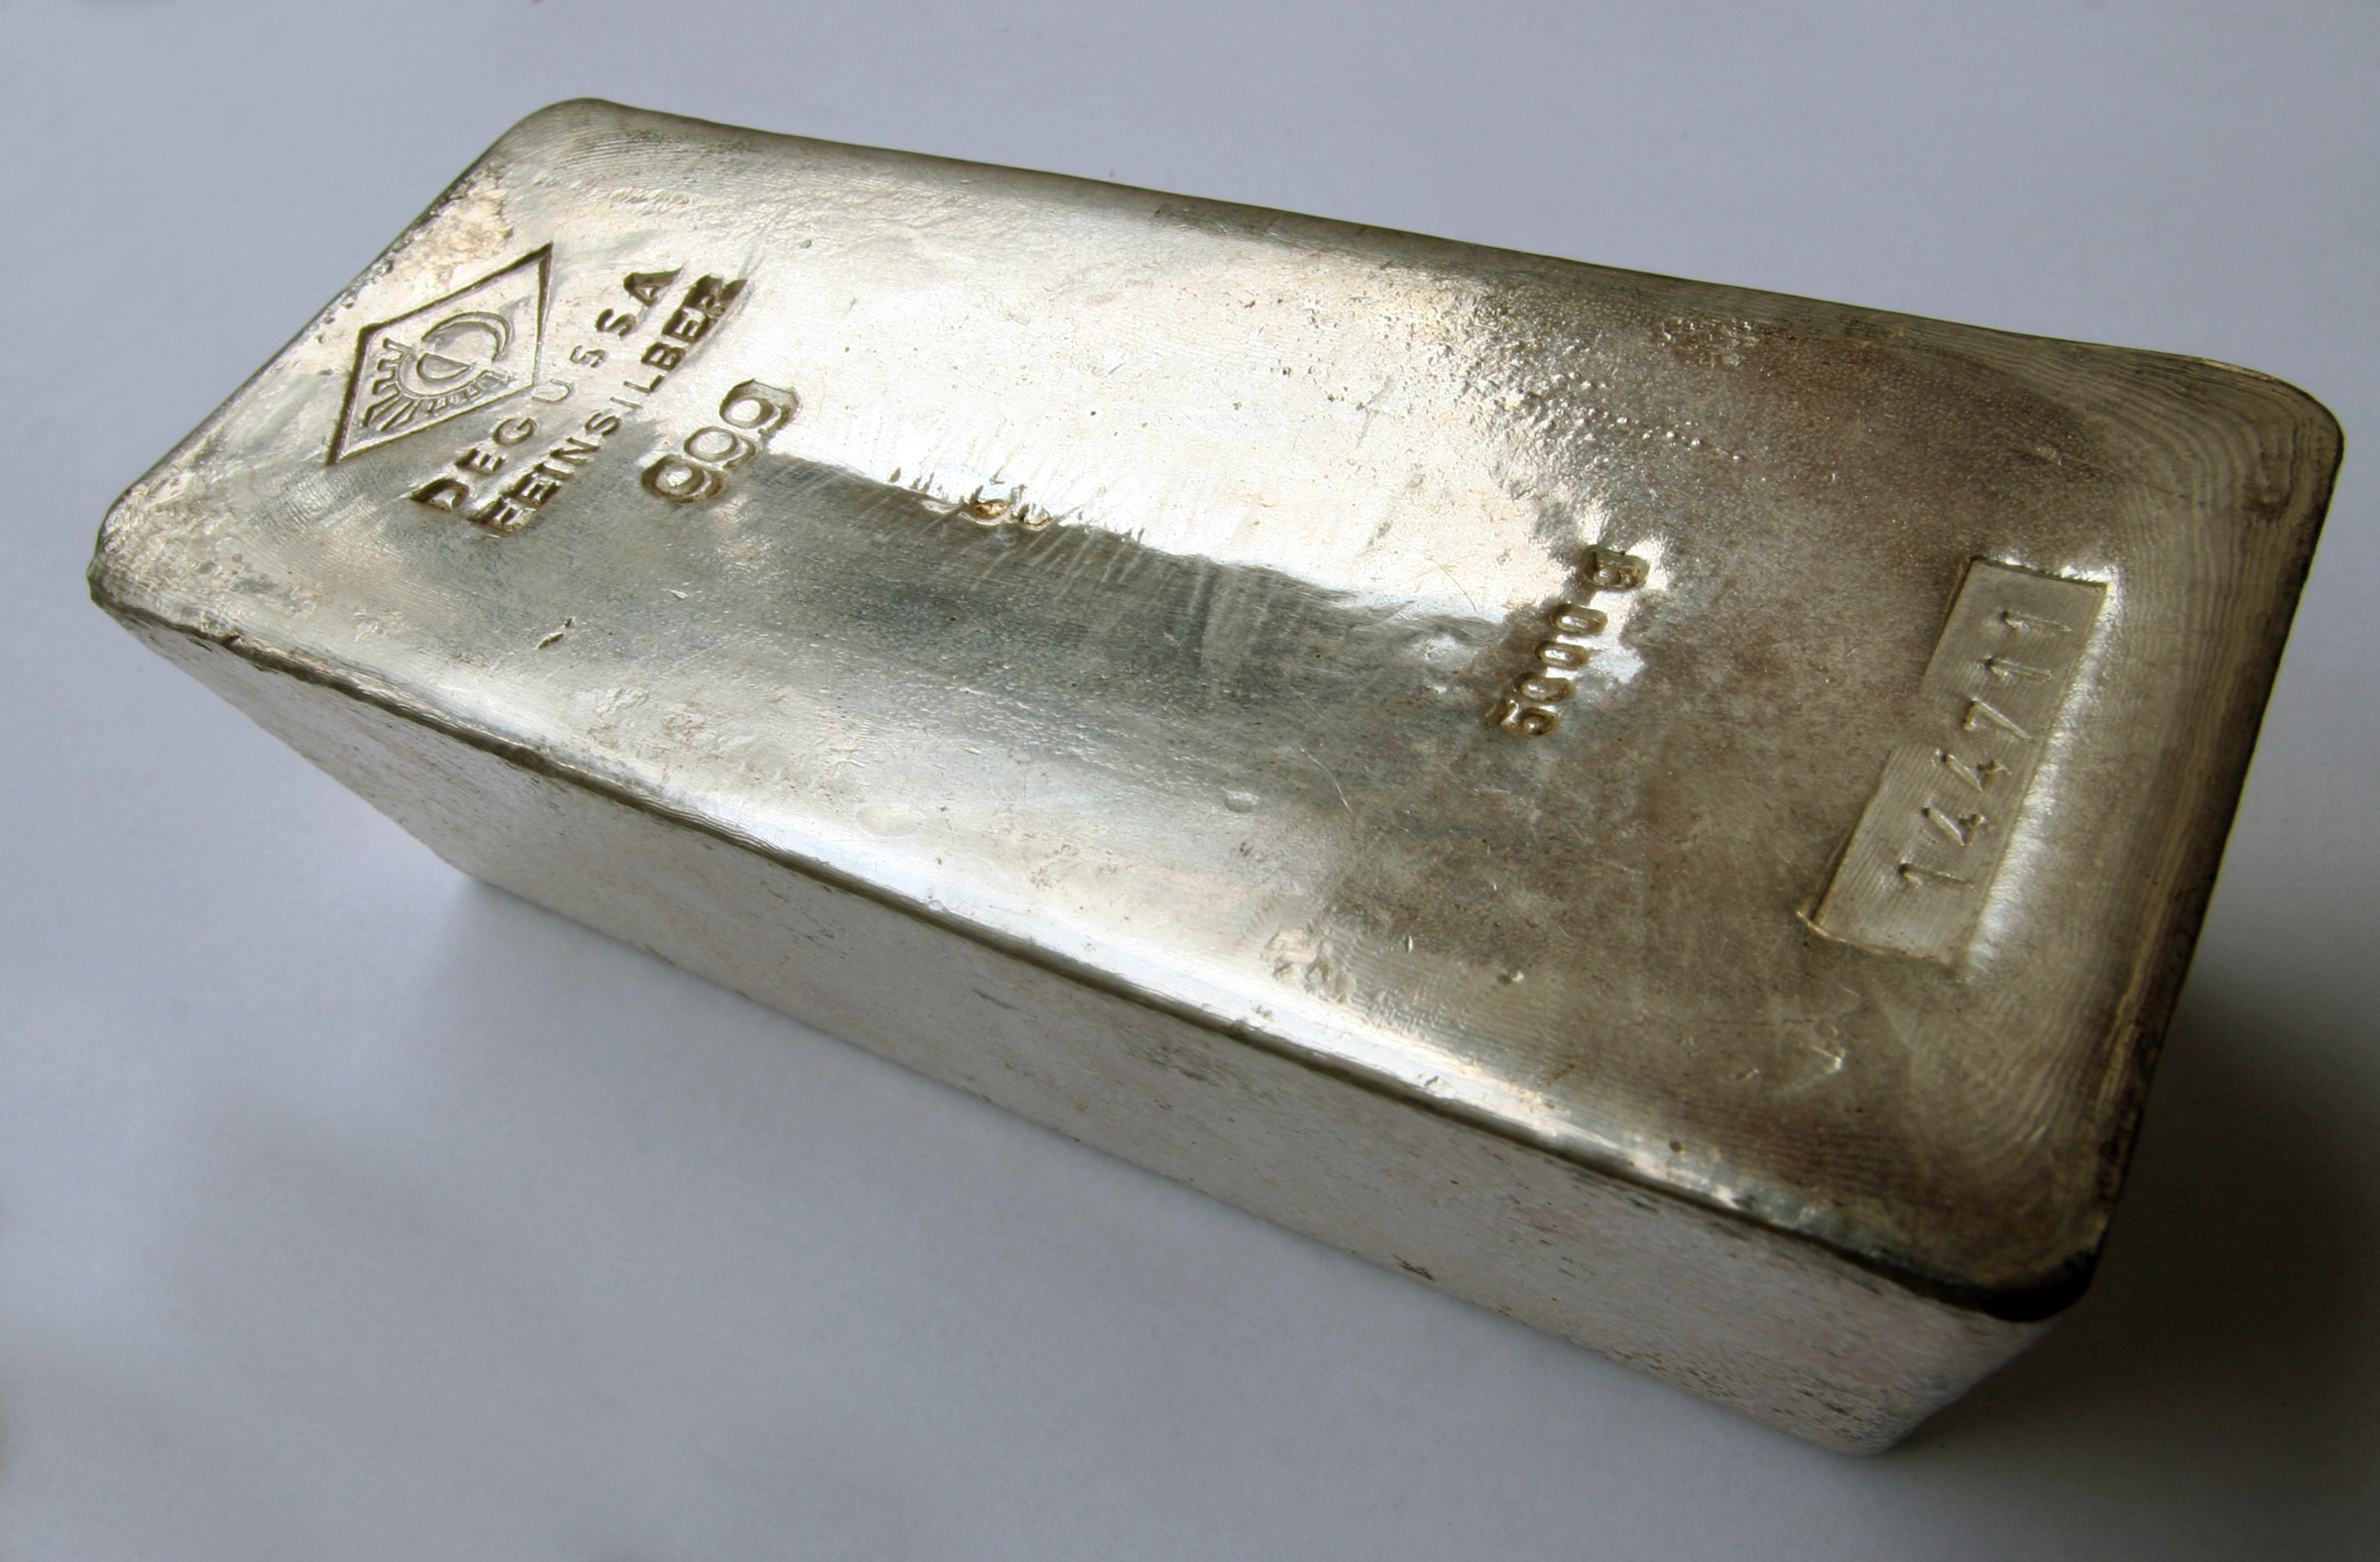 How To Sell Silver Bars: Insider's Guide to Where, Why, and How